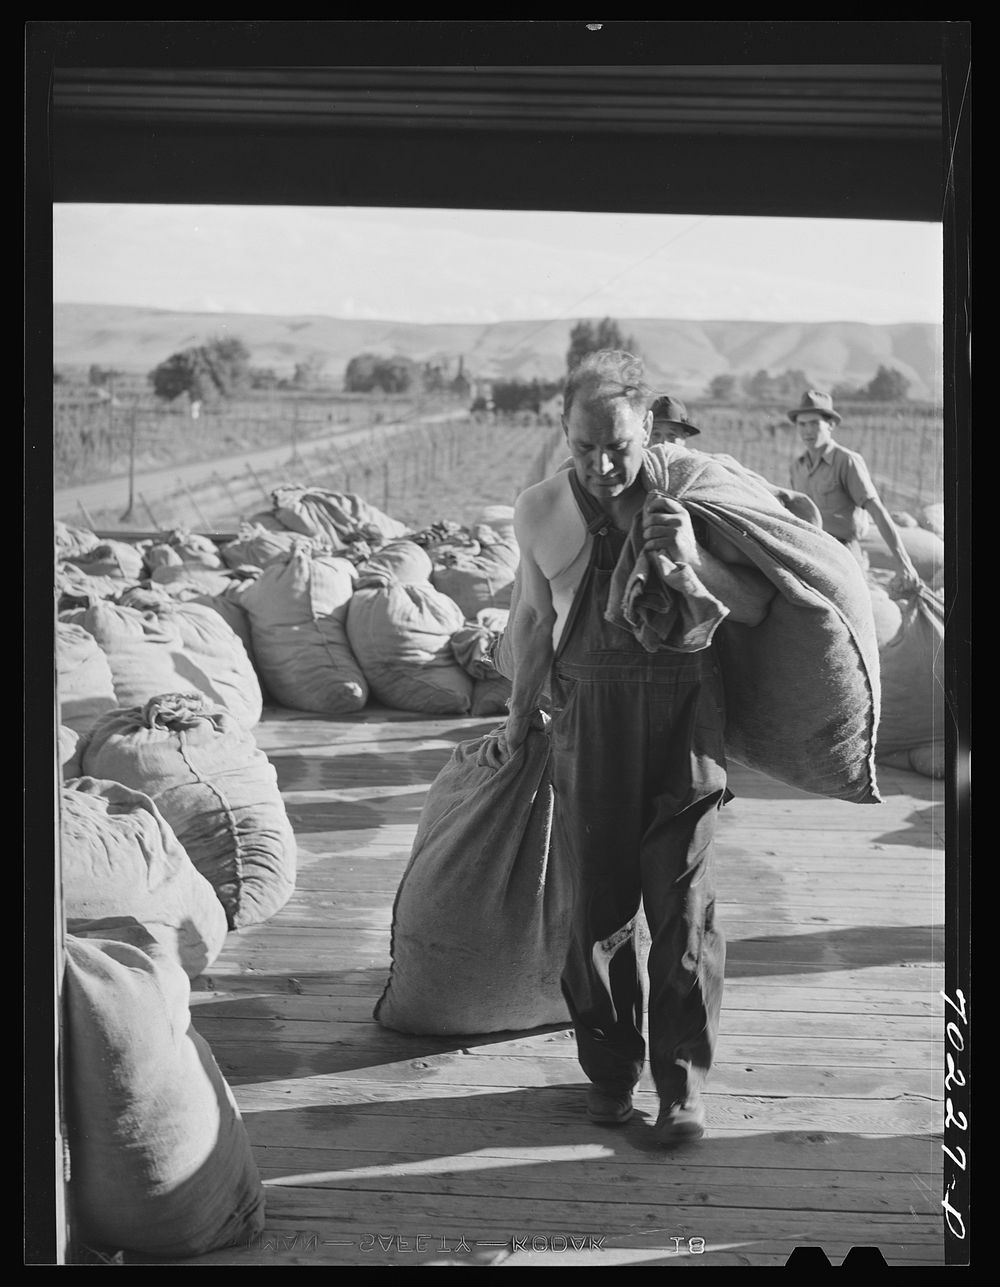 Carrying sacks of hop into the drying room at the kiln. Yakima County, Washington. Hops stay in kiln drying for about…